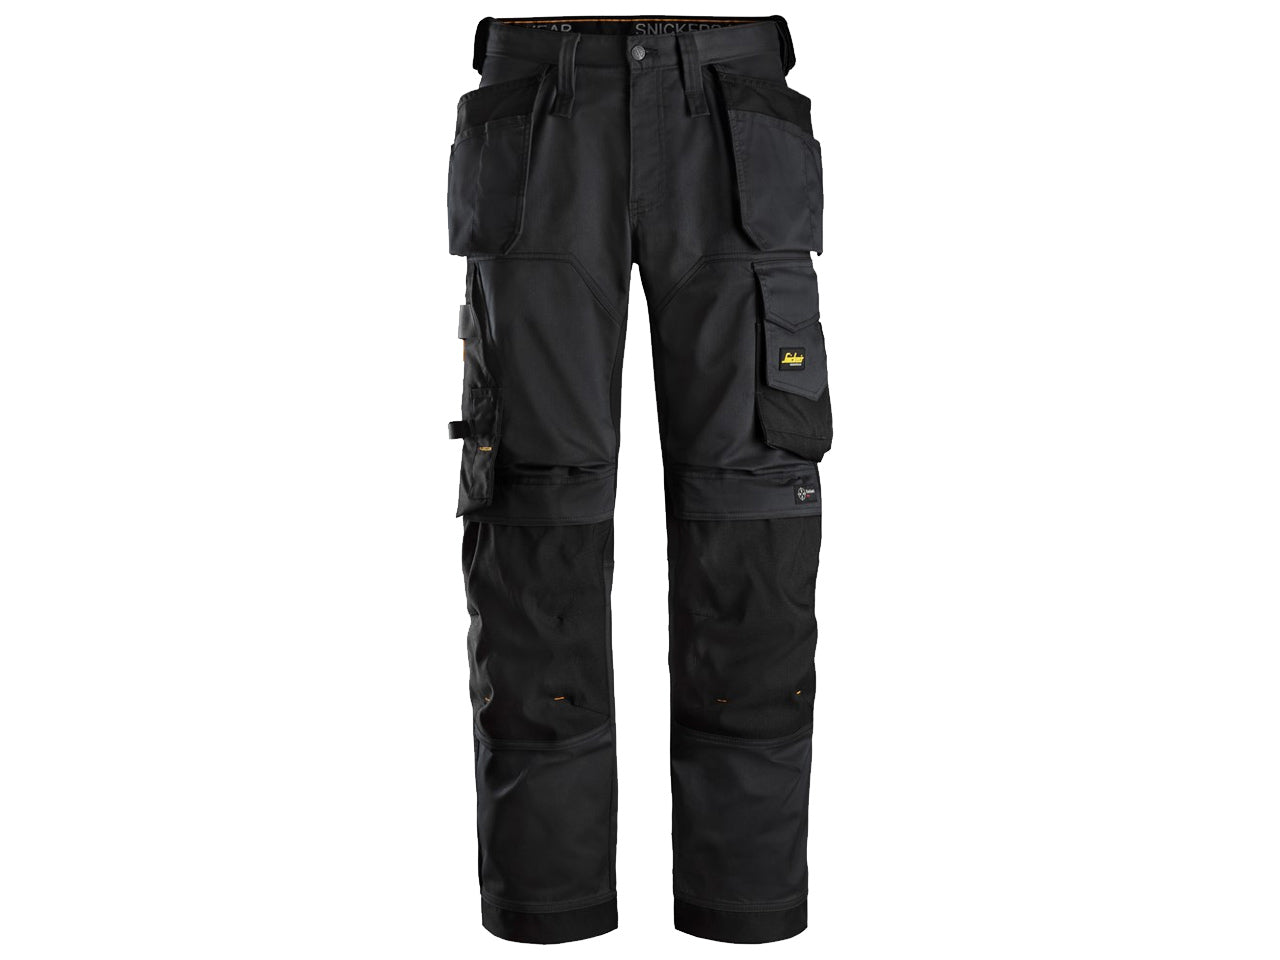 Snickers 6251 Allroundwork Stretch Loose Fit Work Trousers With Holster Pockets Black